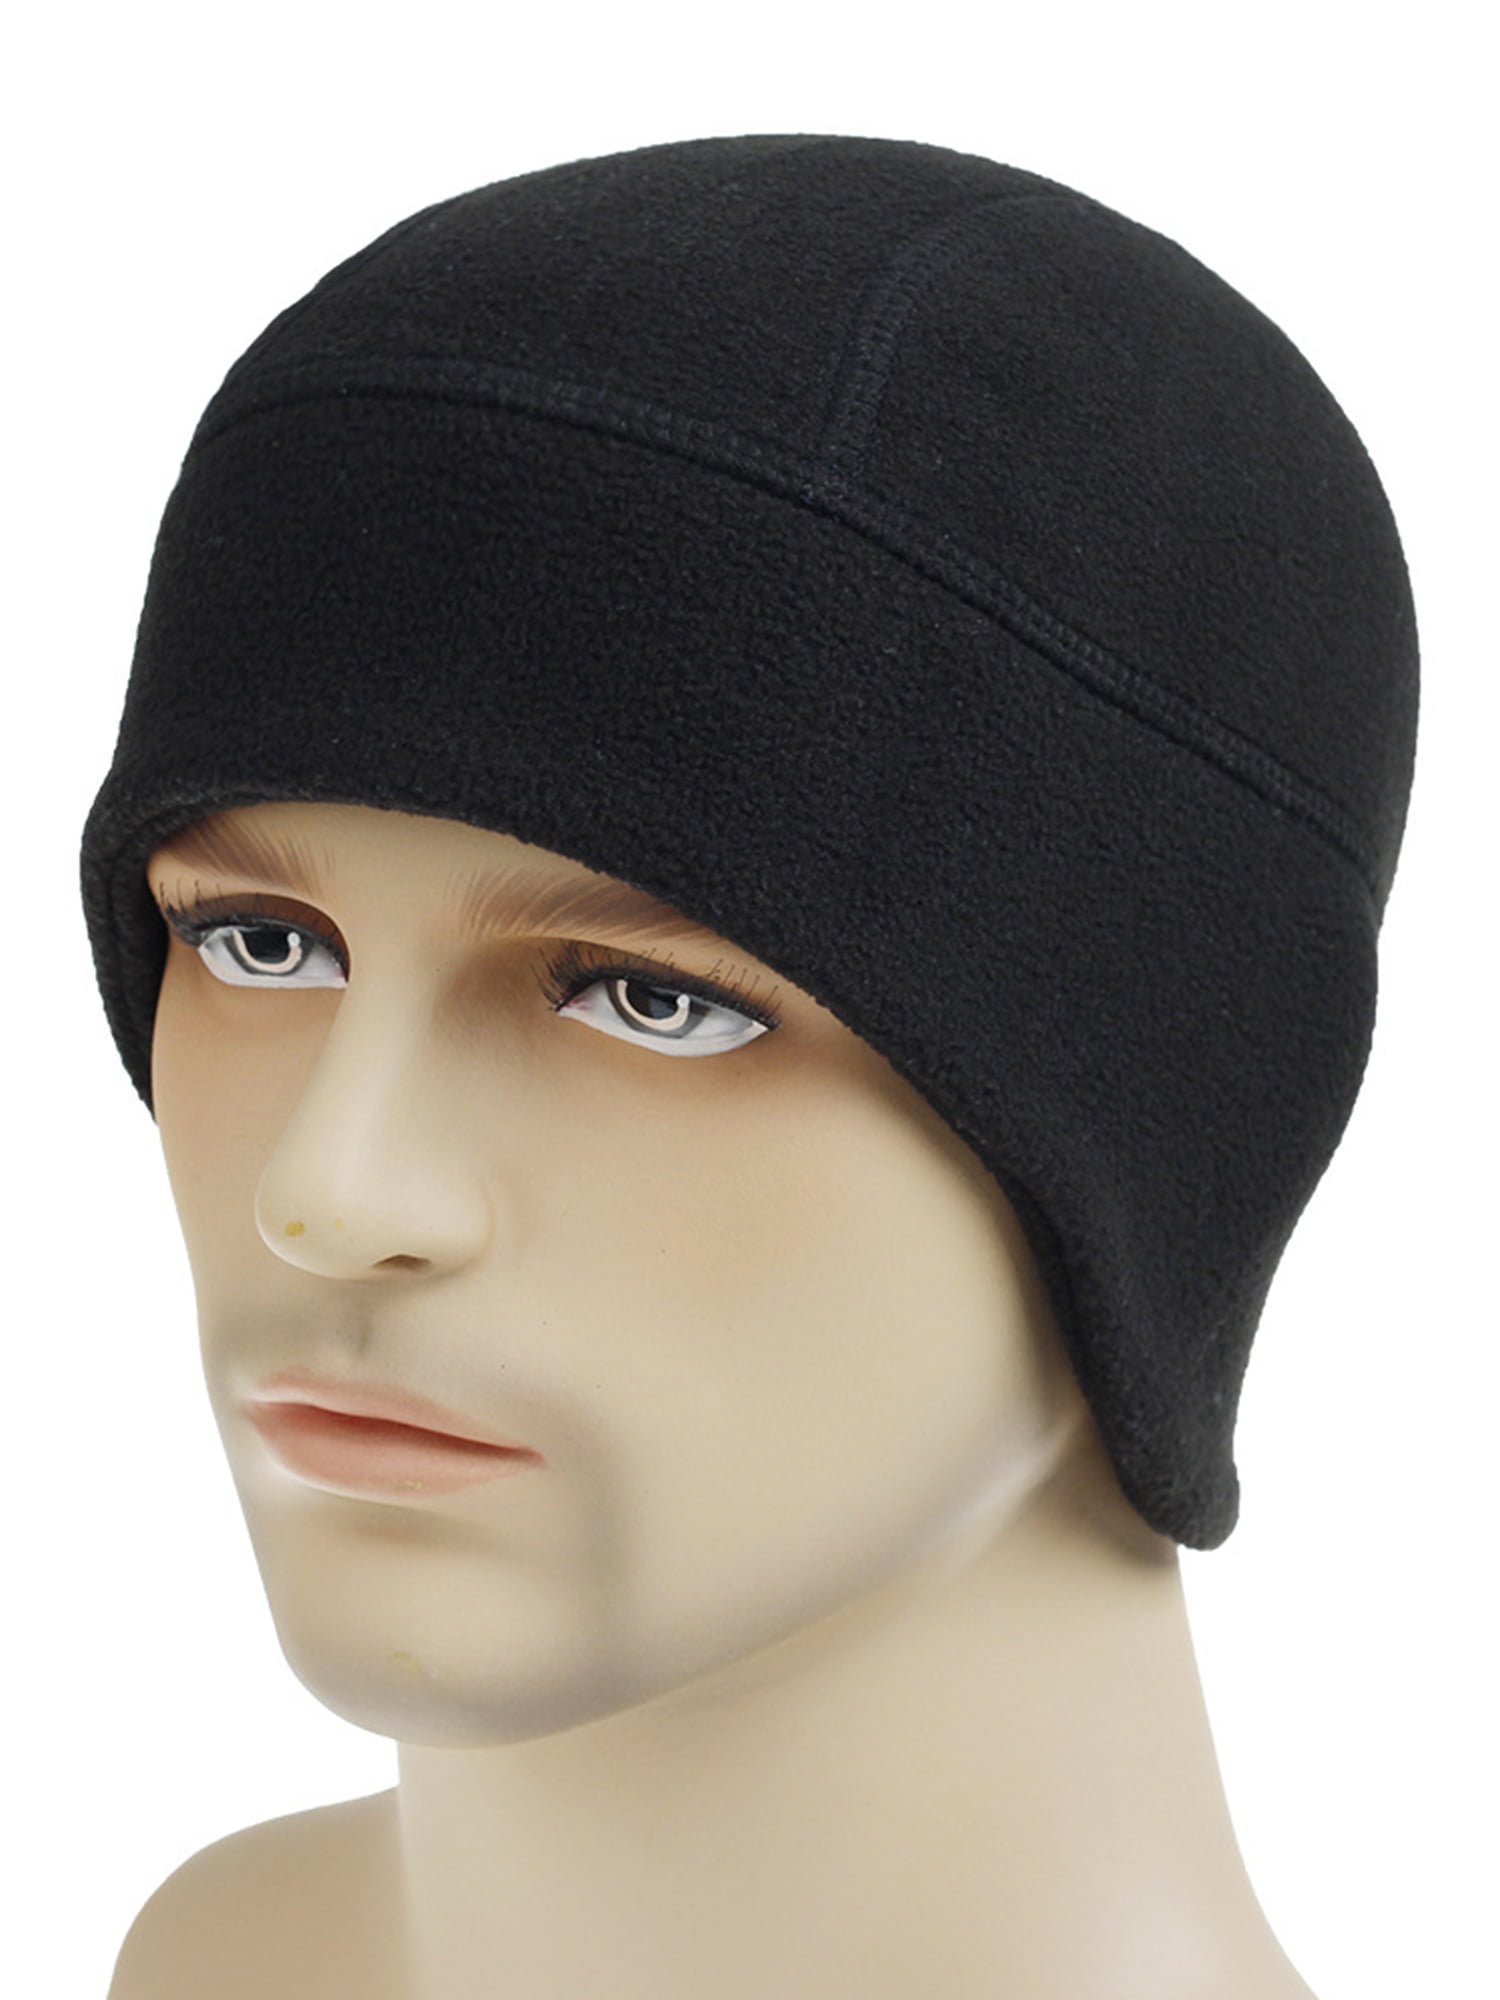 Mens Boys Knitted Ribbed Skull Ski Beanie Hat Adults Winter Warm Stretch Cap 